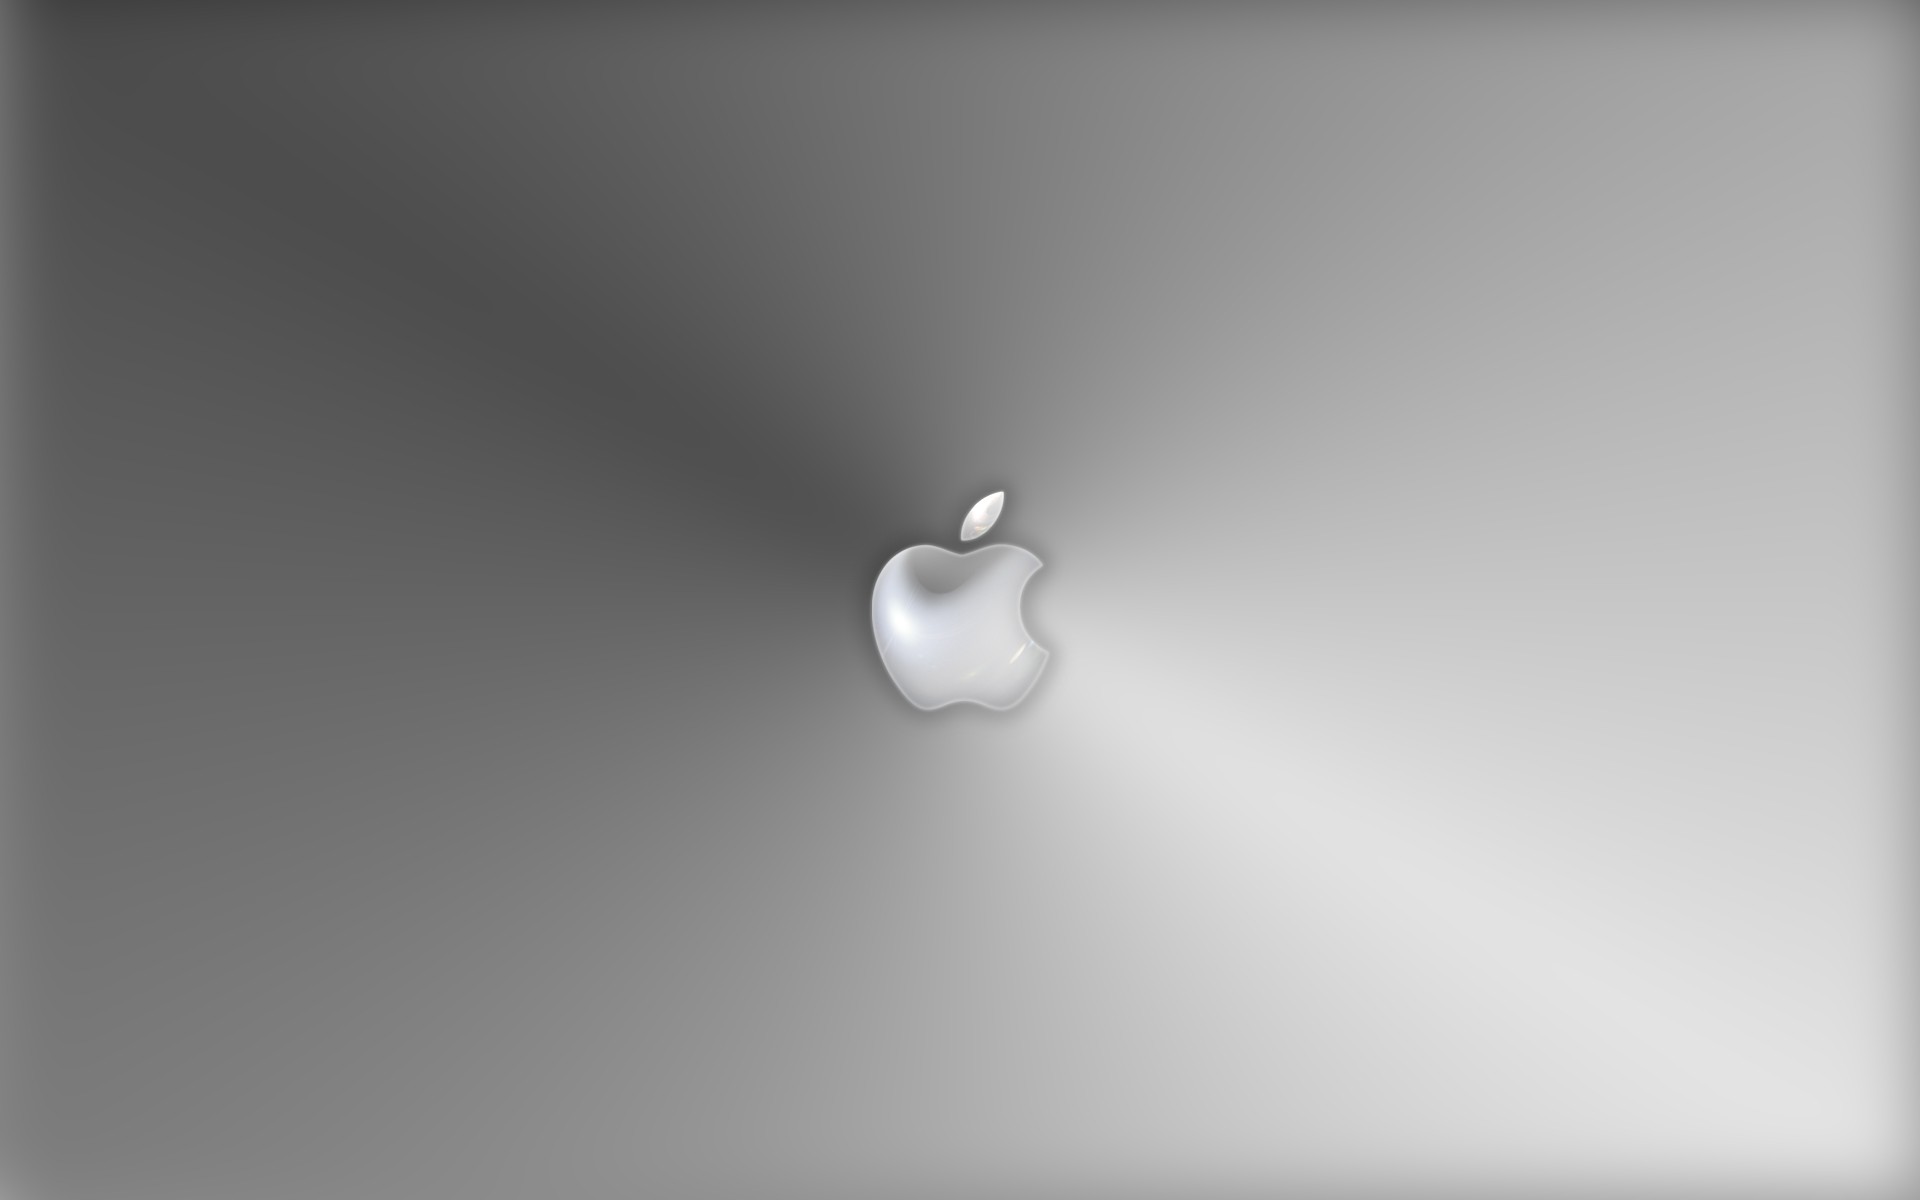 36+ Apple wallpapers ·① Download free cool HD backgrounds ...